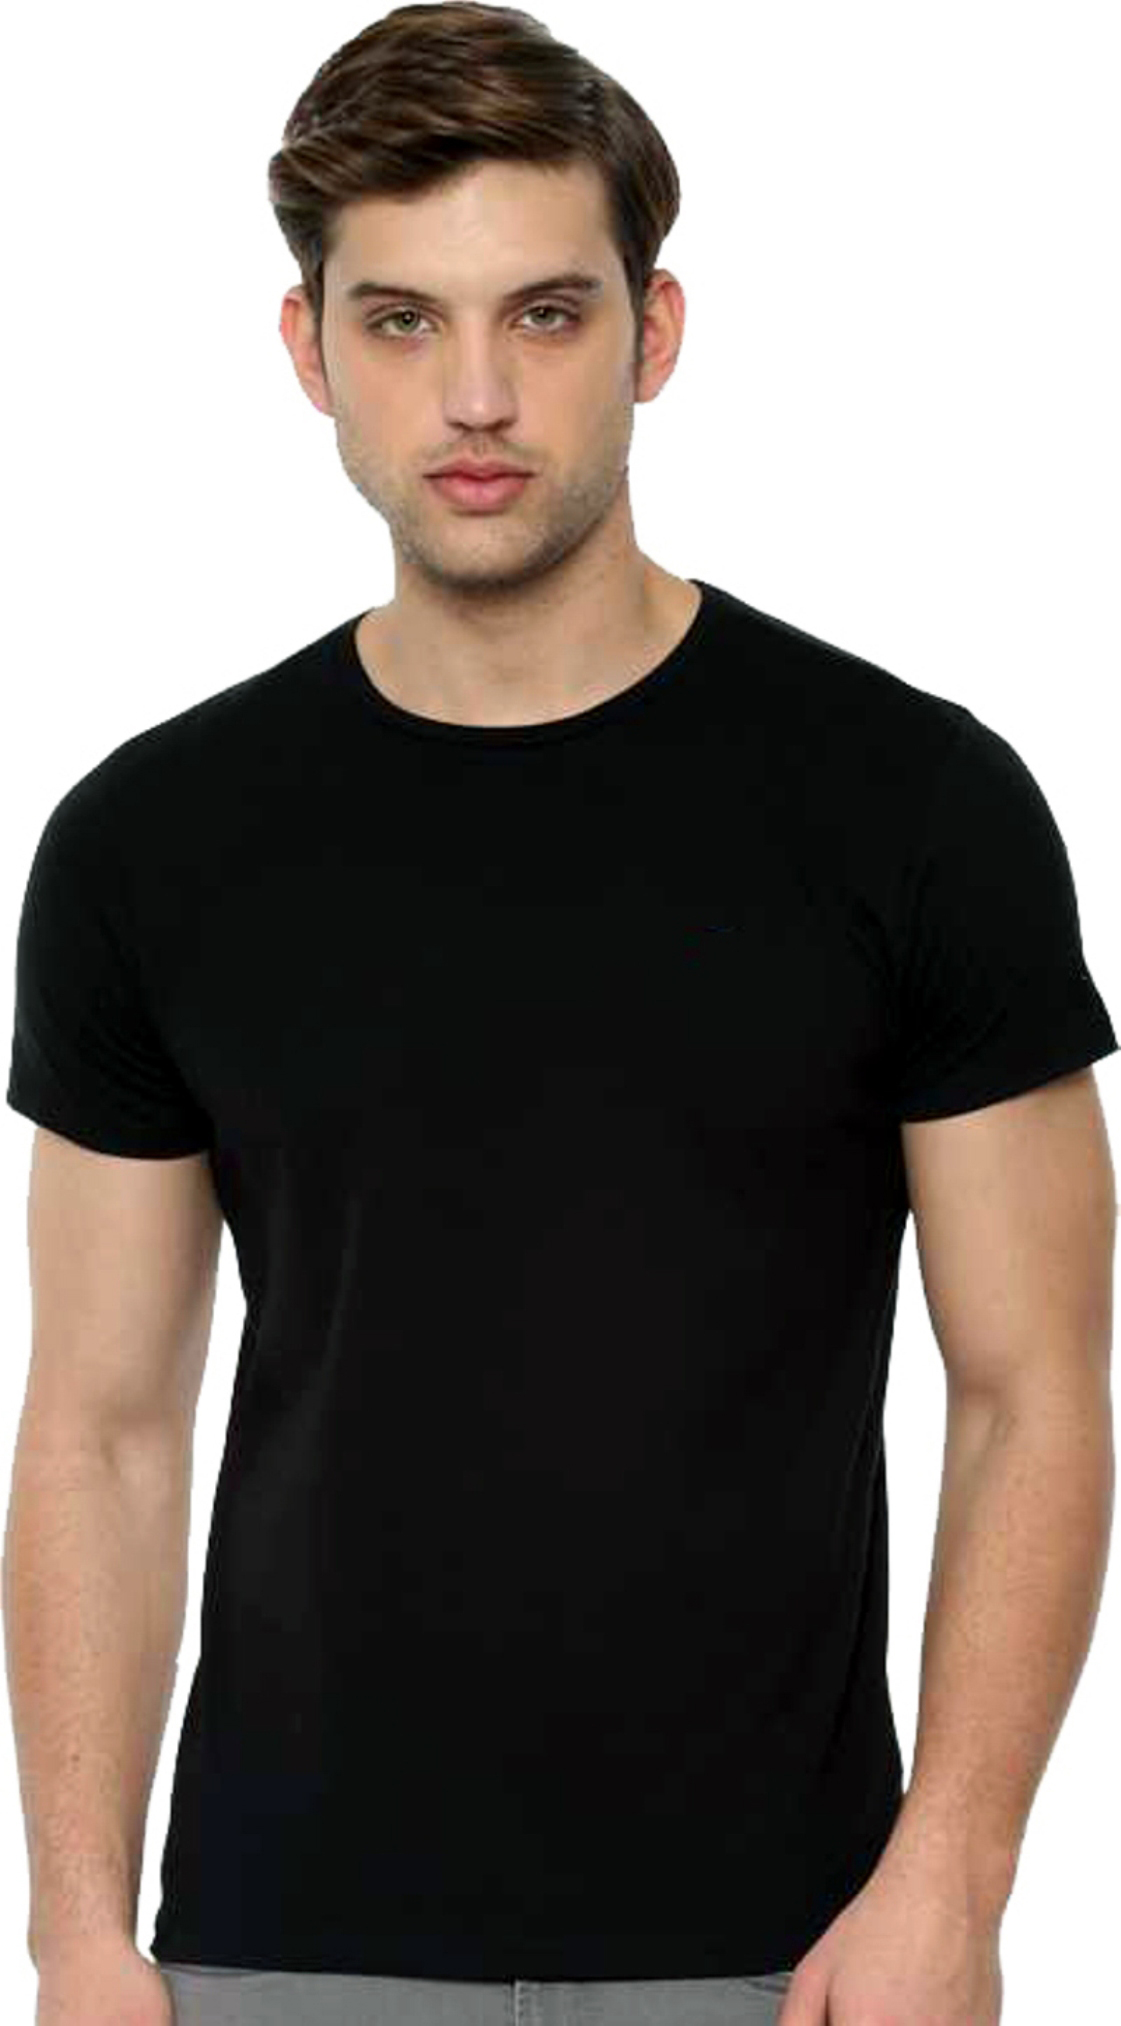 Buy Cotton Round Neck Plain T-Shirt for Men Online @ ₹249 from ShopClues